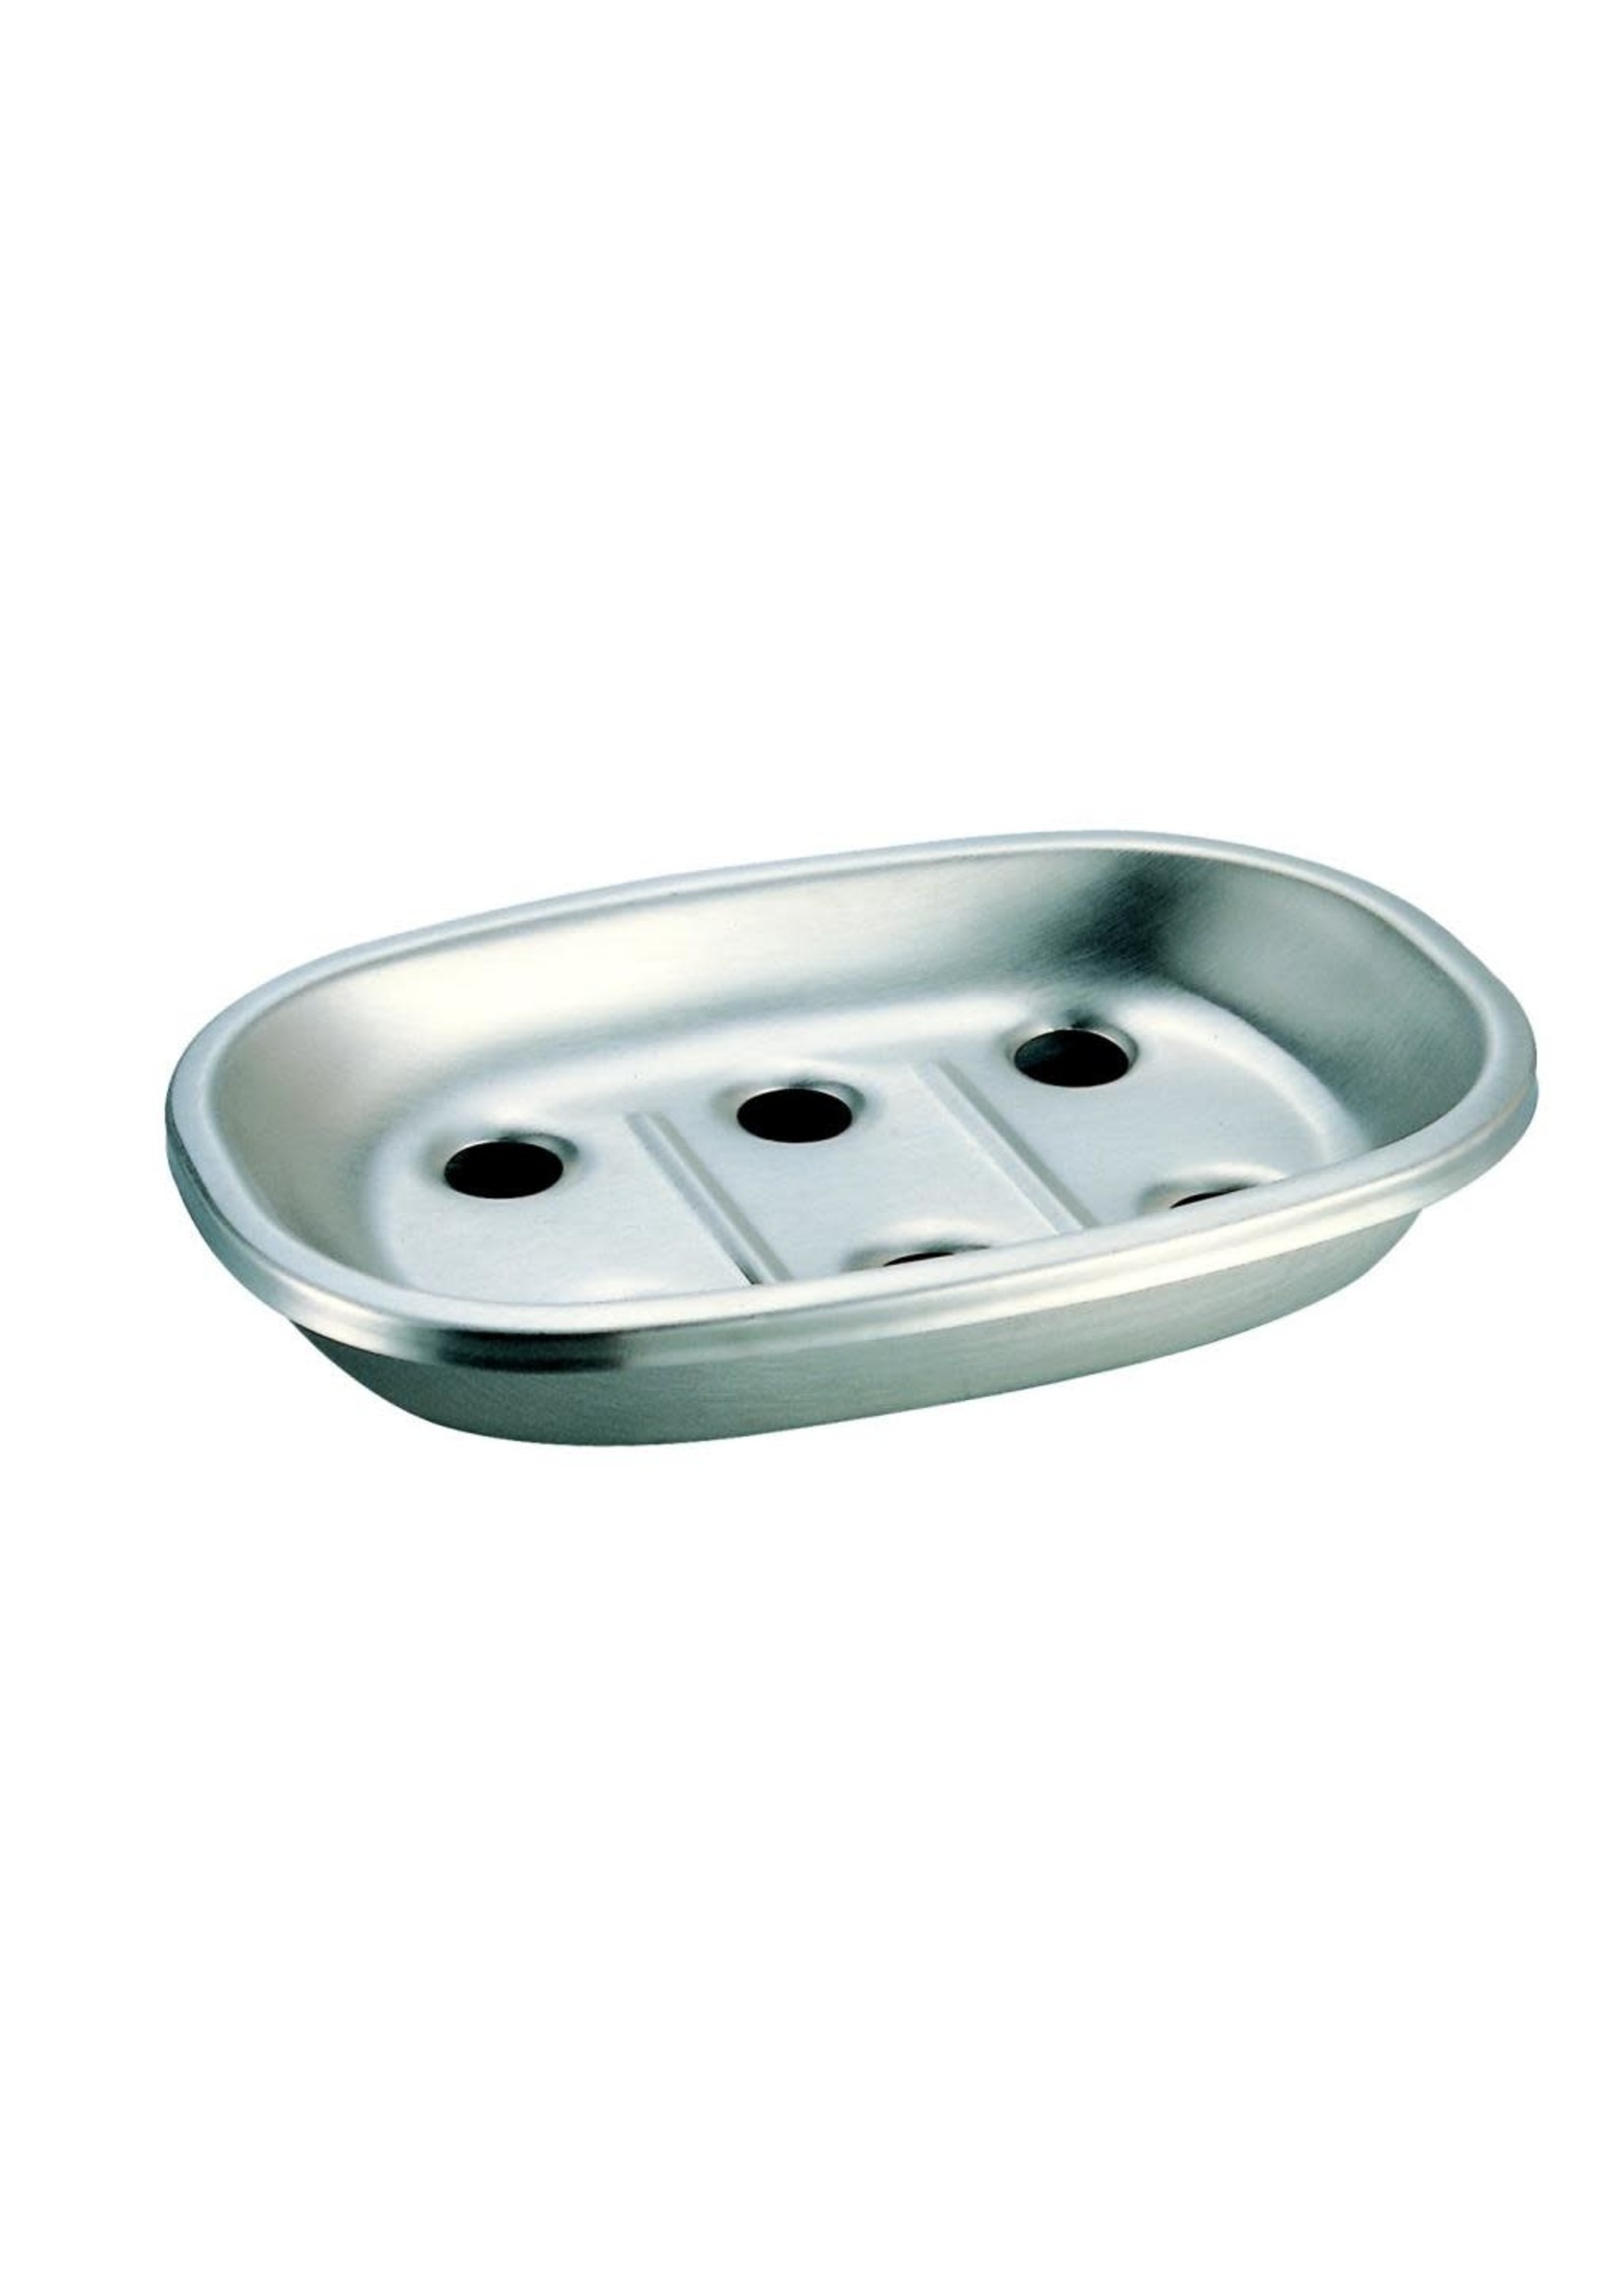 ITY INTERNATIONAL Stainless Steel Soap Dish